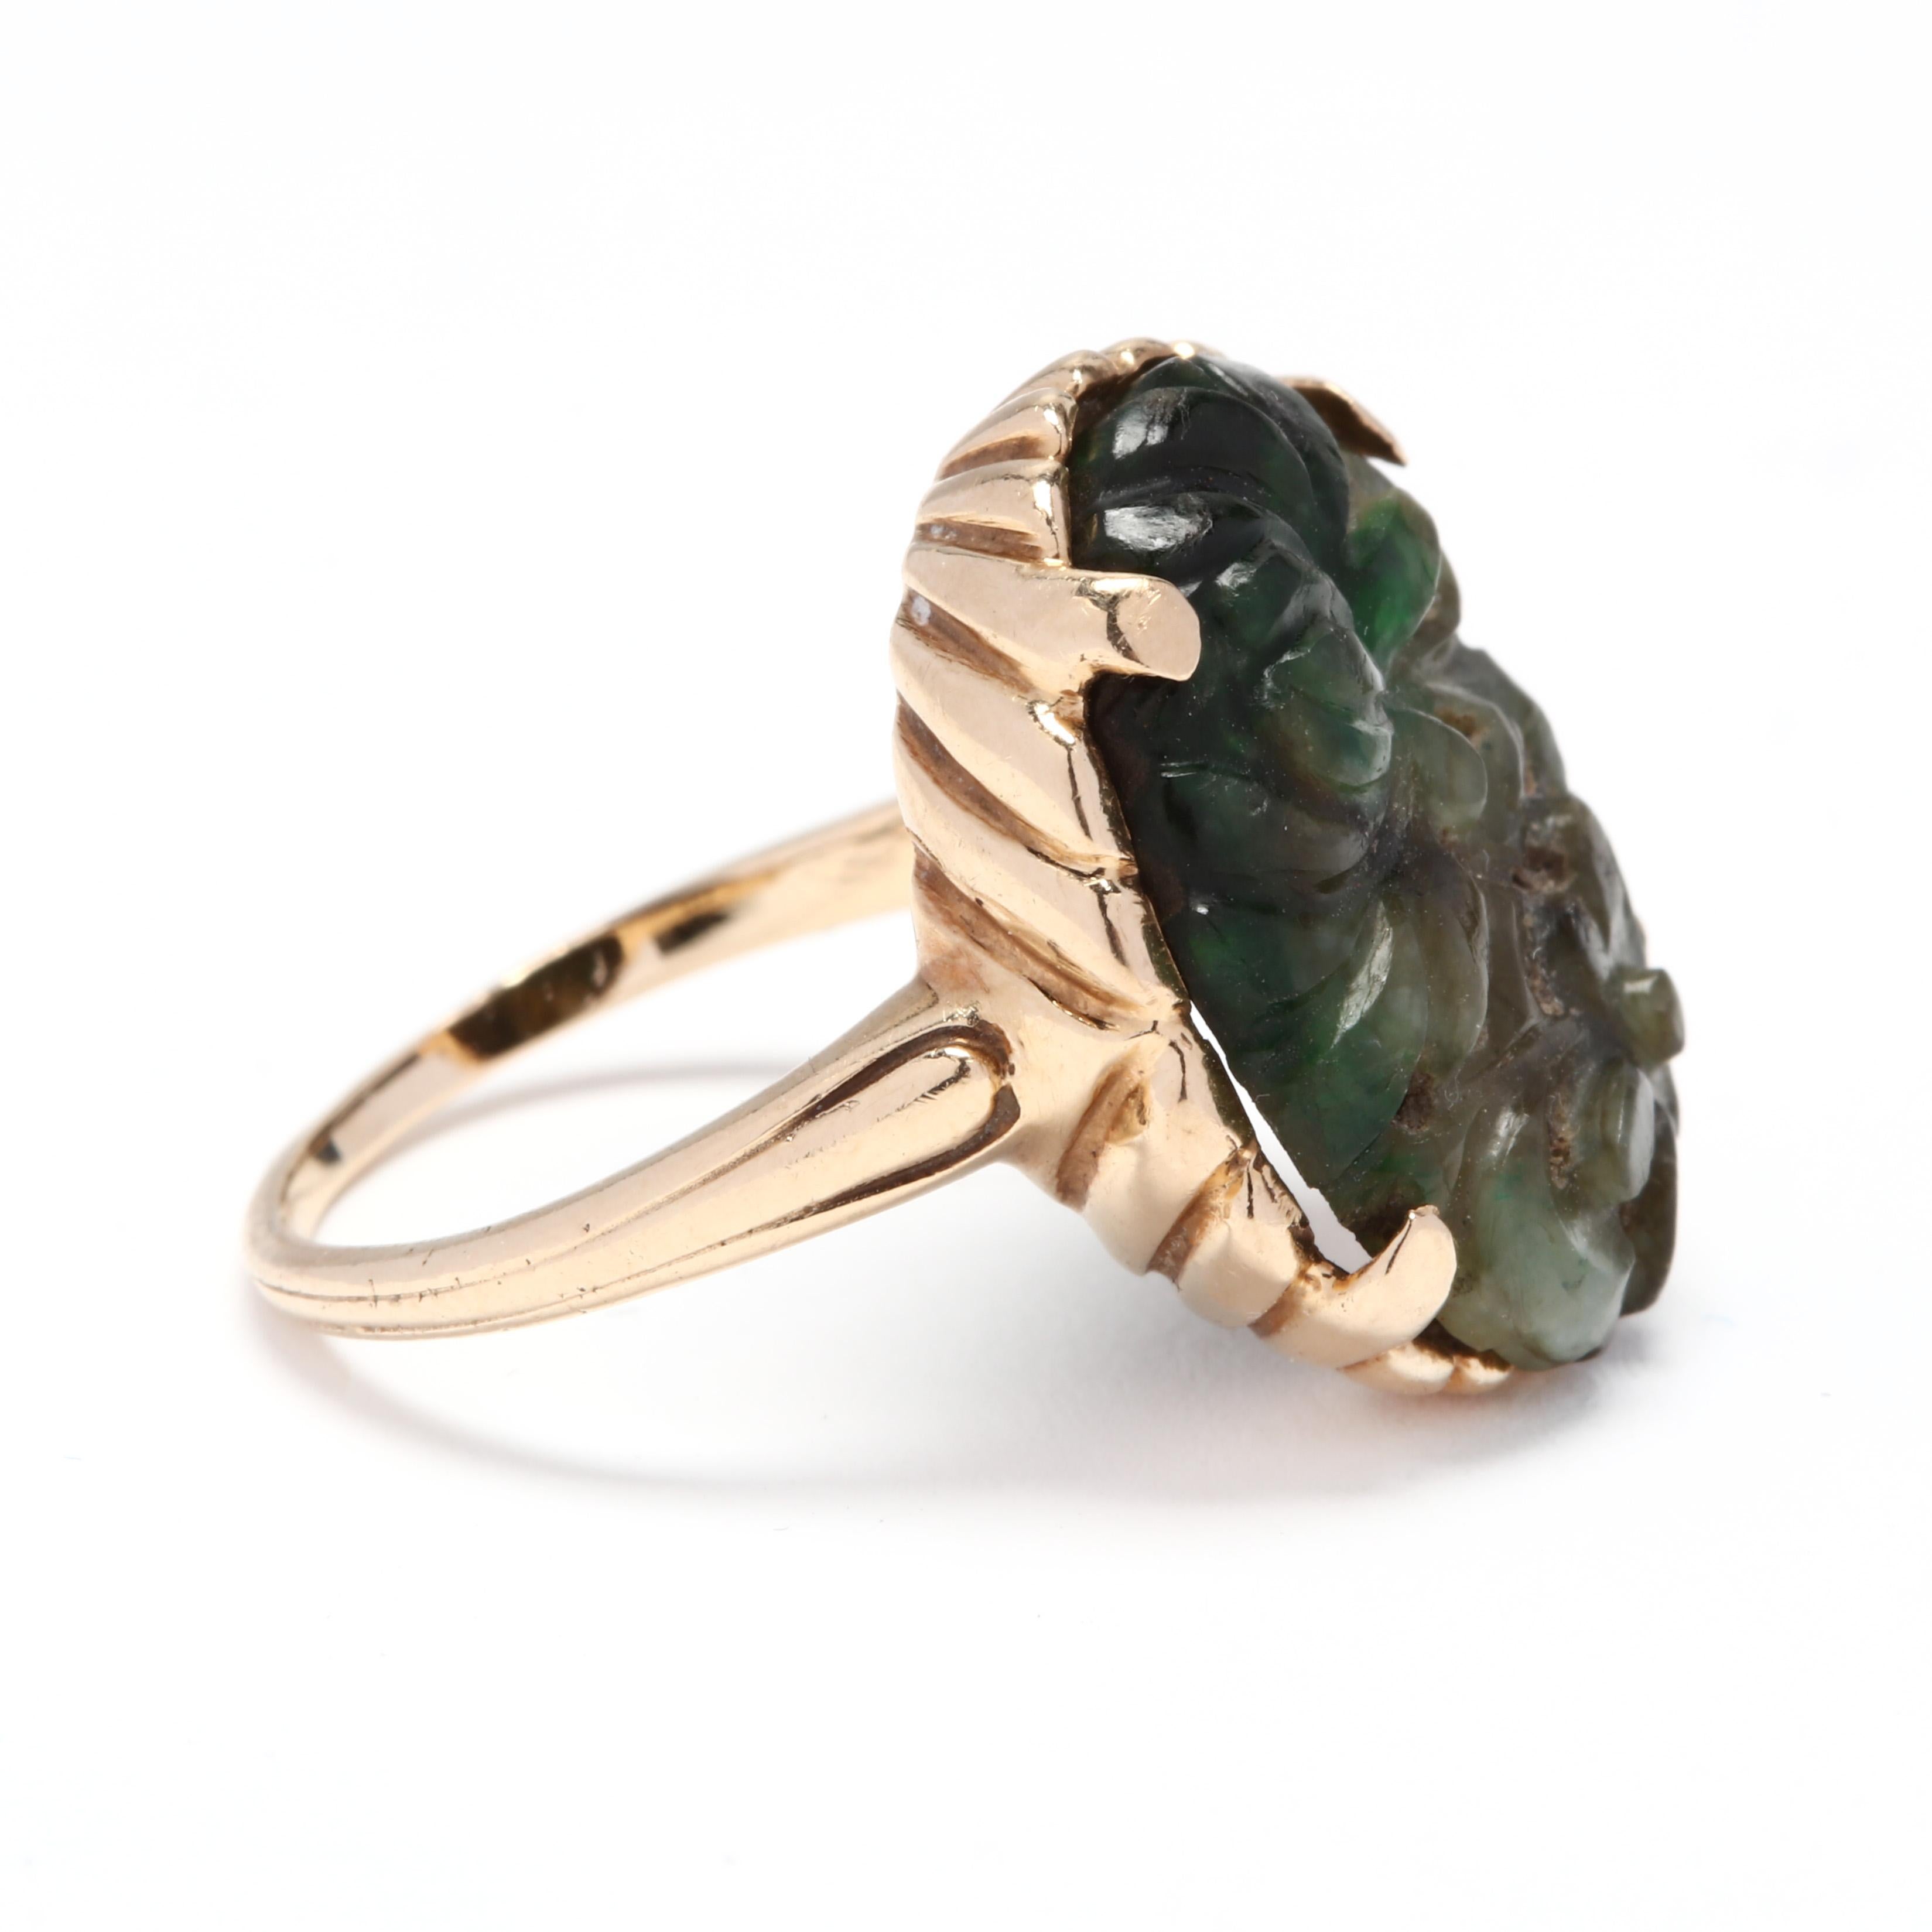 A 14 karat yellow gold and carved jade statement ring. This ring features a prong set, carved oval jade stone in a ridged mounting with a slightly tapered shank.

Stones:
- jade, 1 stone
- carved oval
- 18.75 x 14.6 mm

Length: 3/4 in.

Ring Size